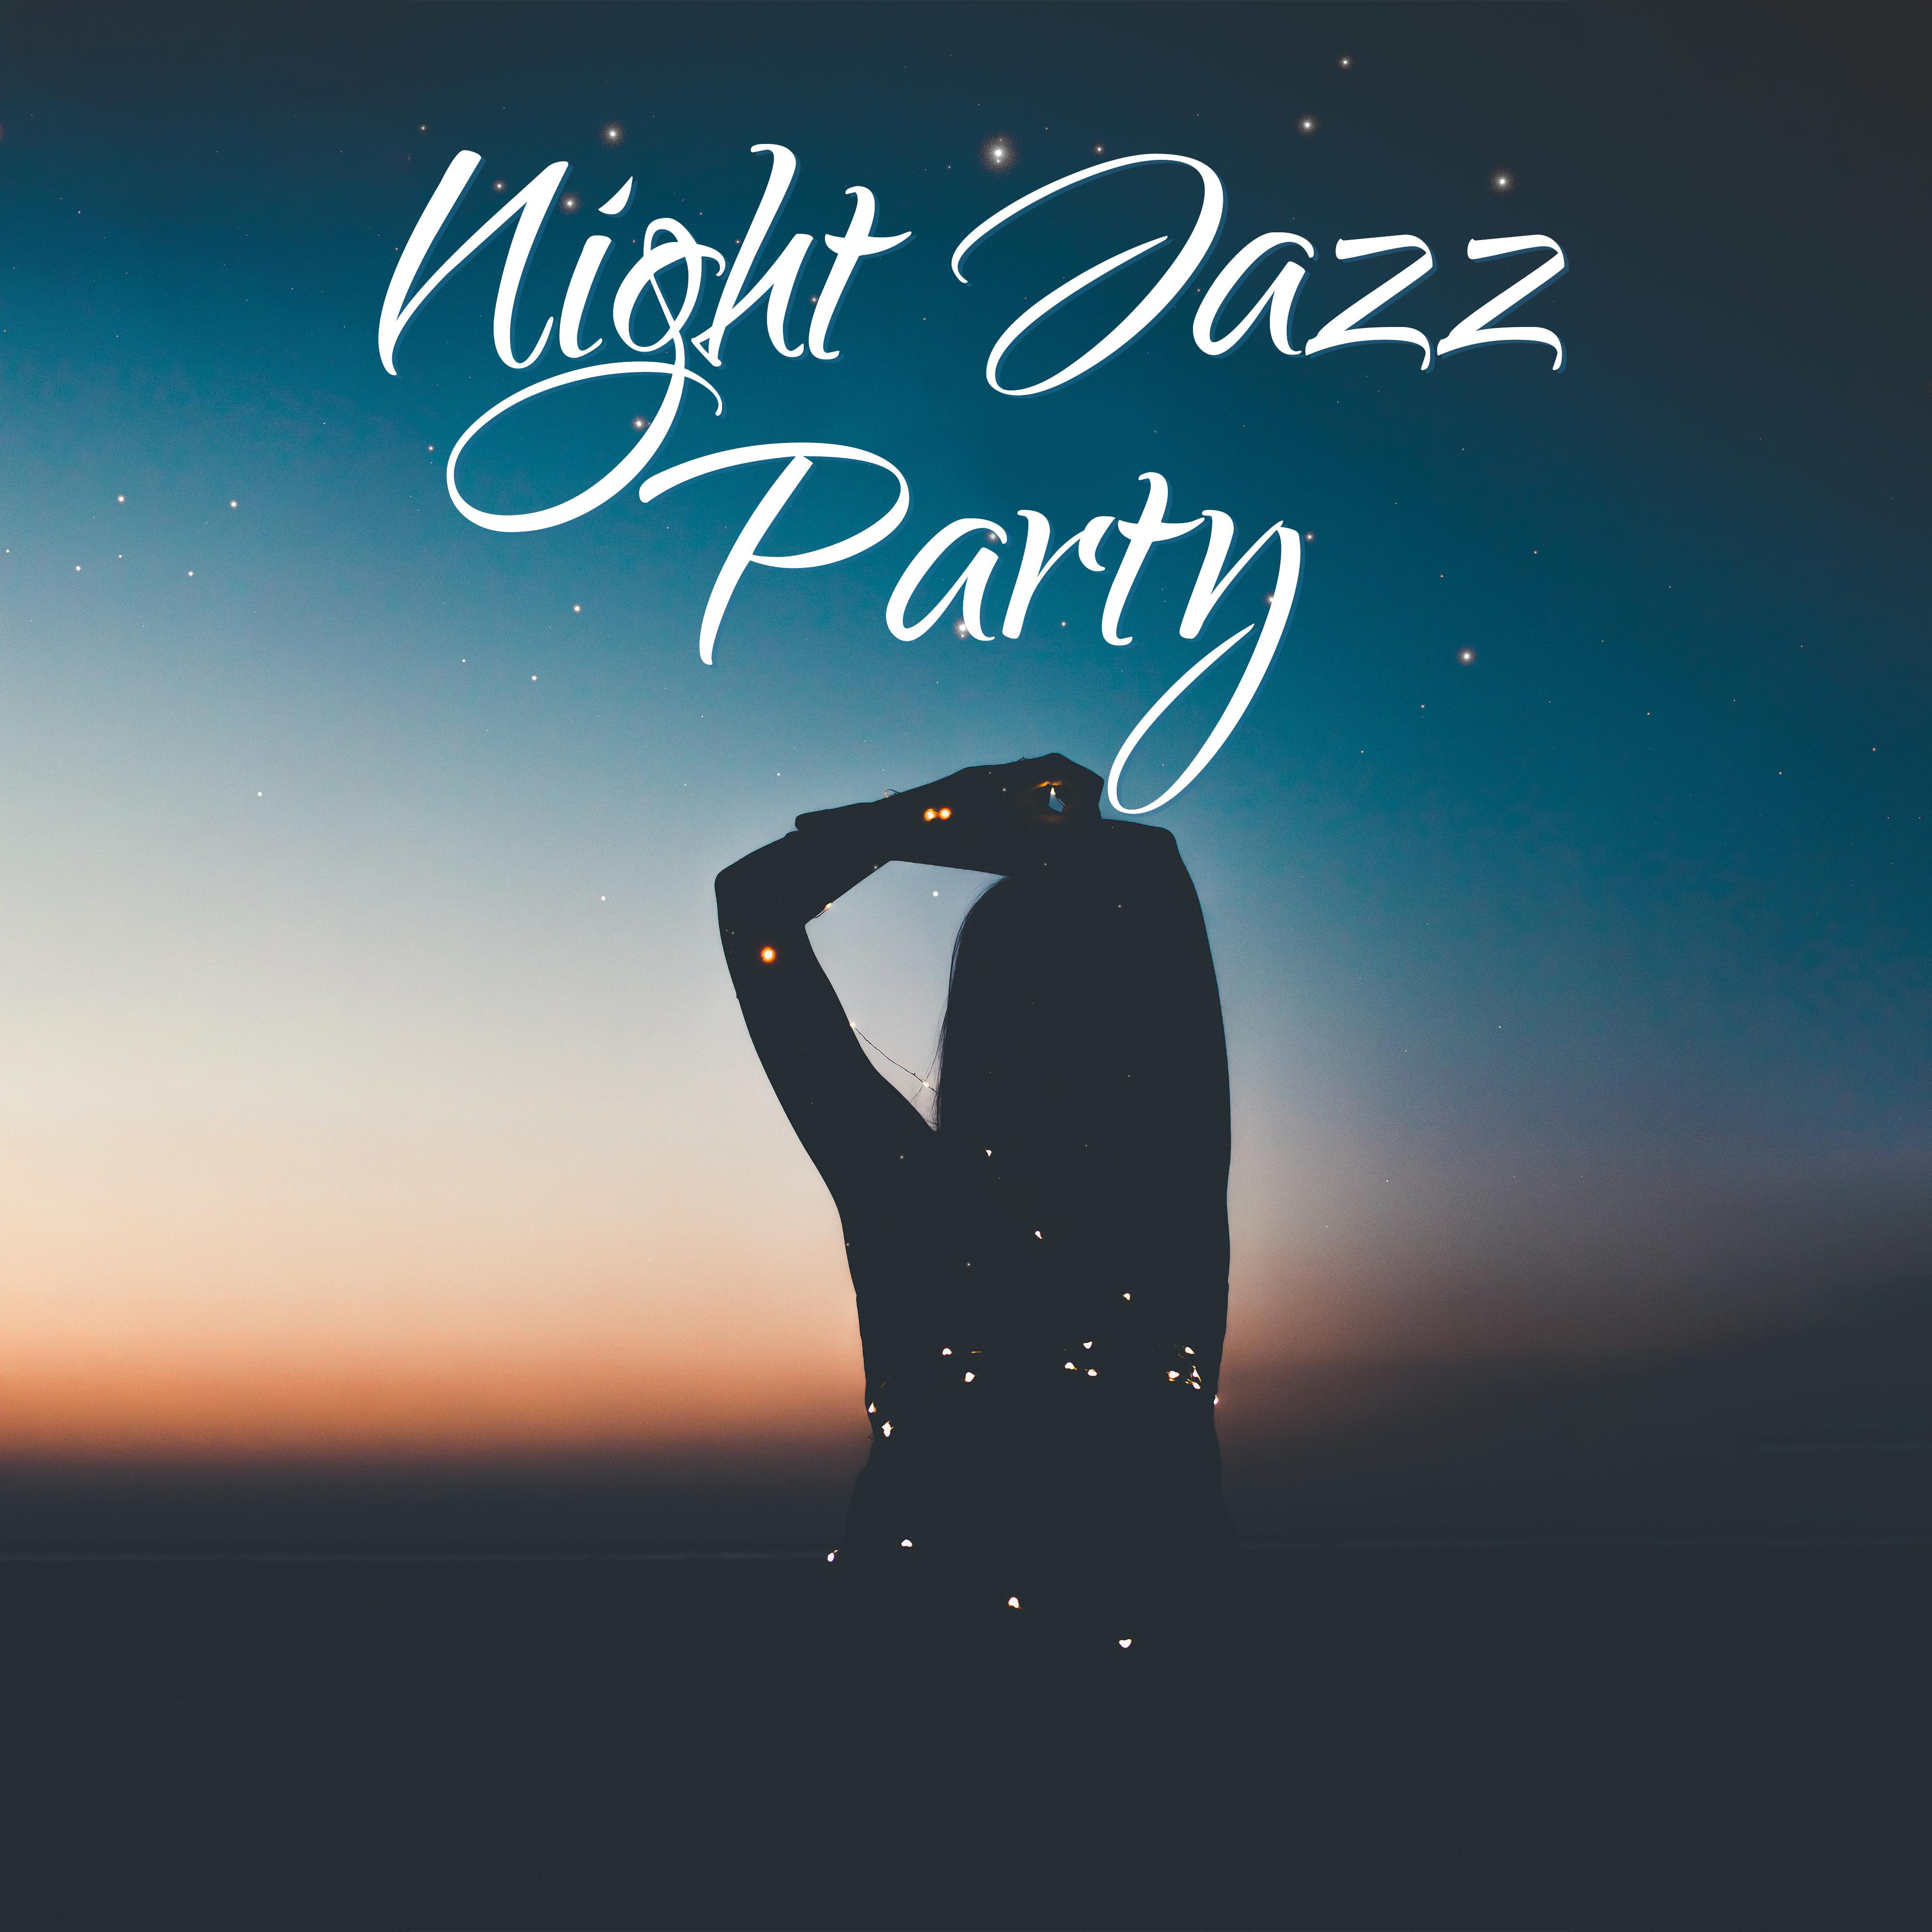 Night Jazz Party  Collection of Relaxing Jazz, Bar Lounge, Jazz Music Ambient, Party Hits, Instrumental Sounds After Work